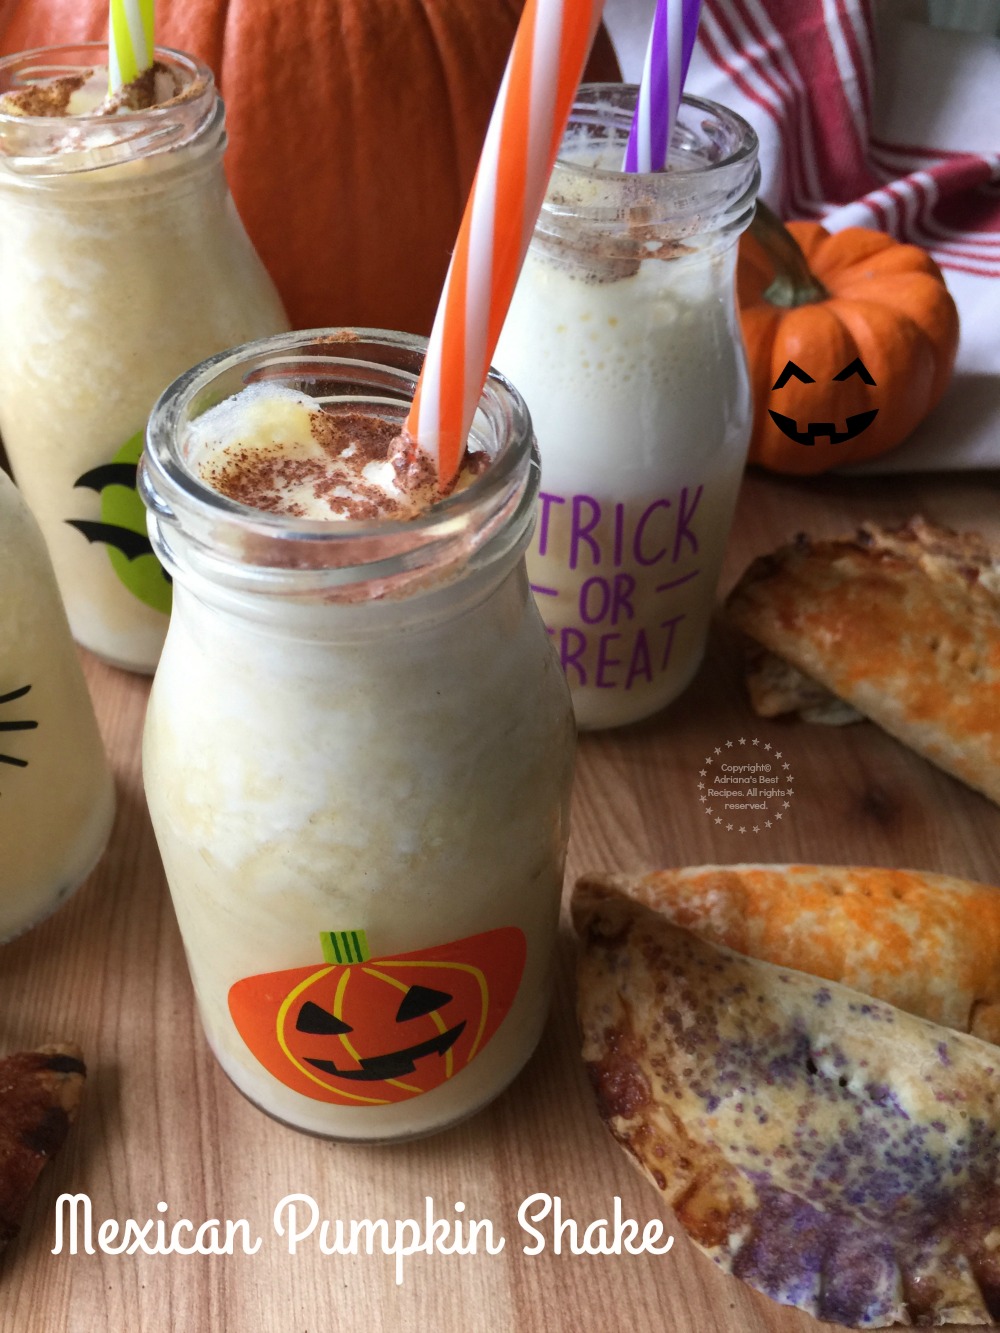 A Tasty Ghoulish Mexican Pumpkin Shake made with candied pumpkin and milk